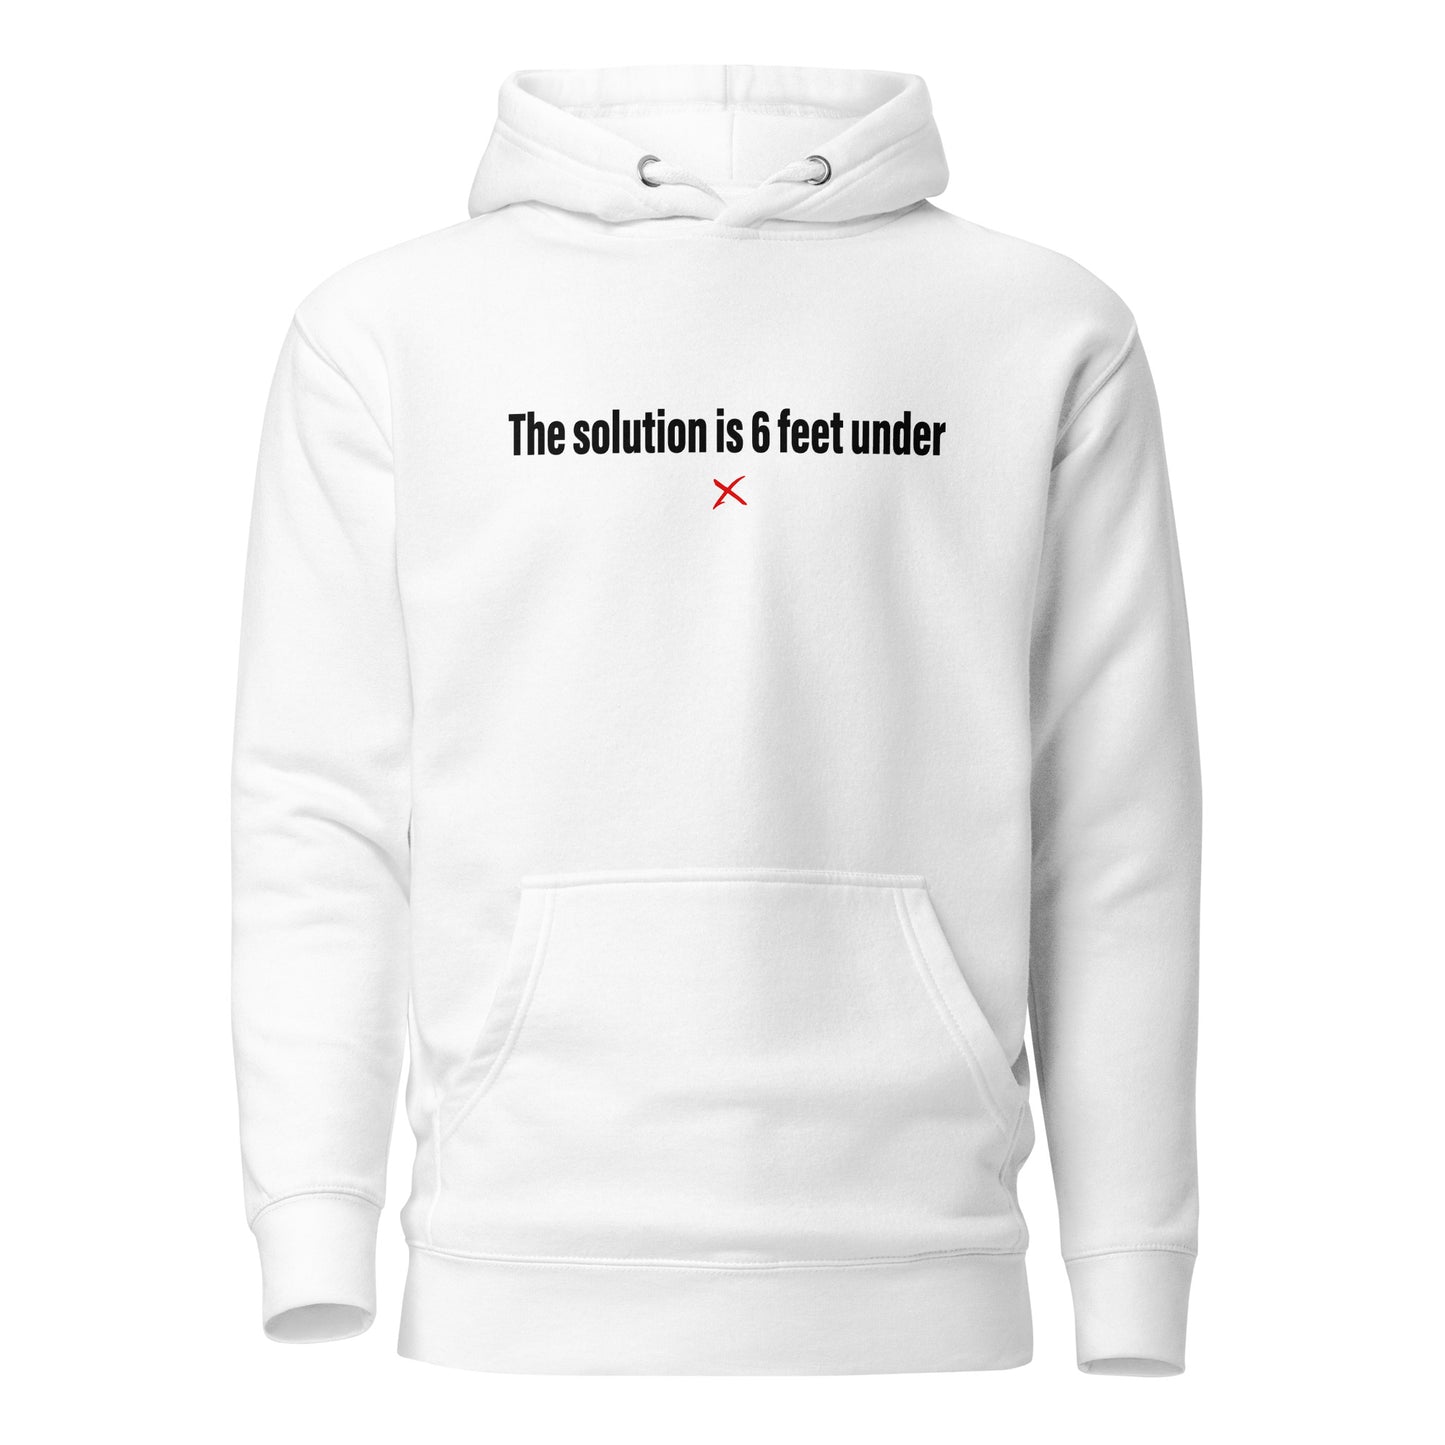 The solution is 6 feet under - Hoodie